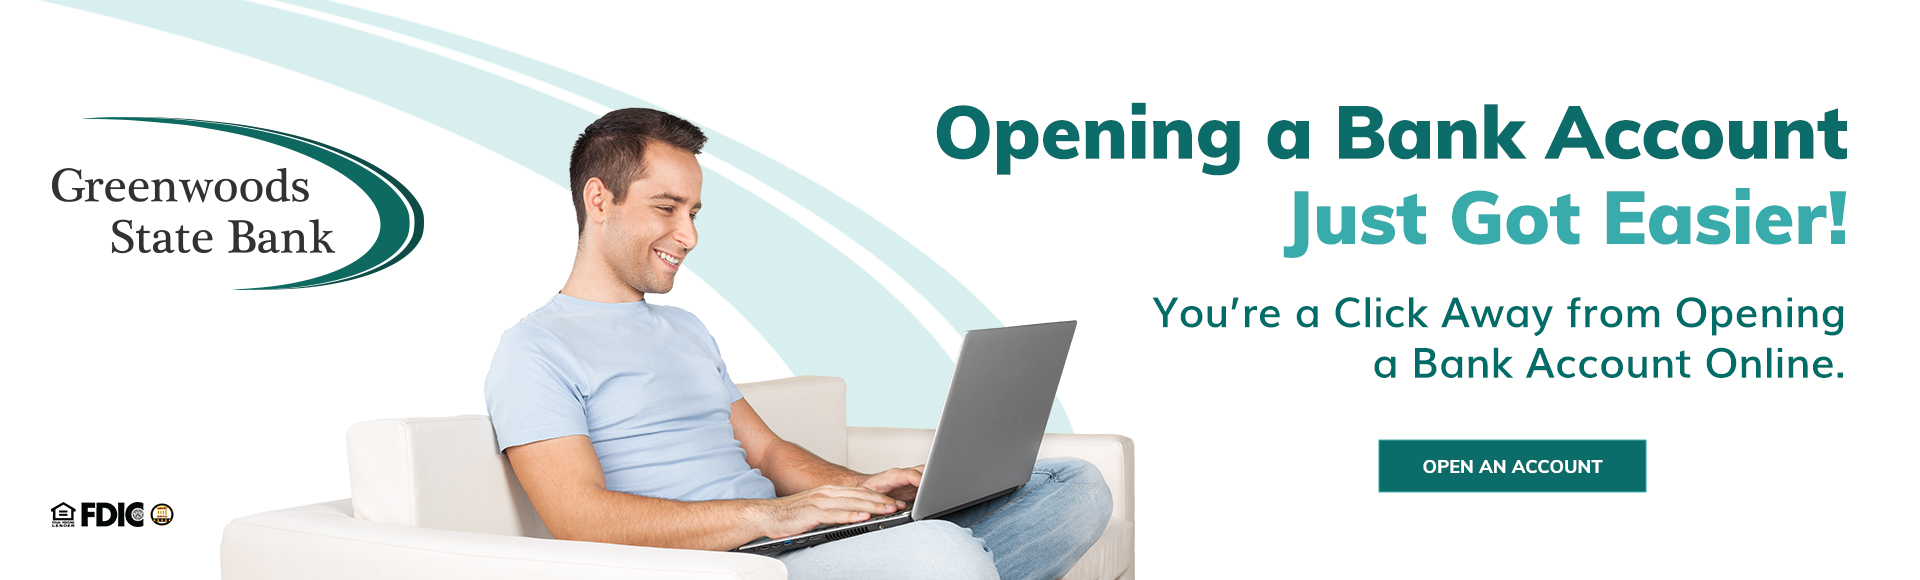 Open a checking account online with Greenwoods State Bank! Learn more now.